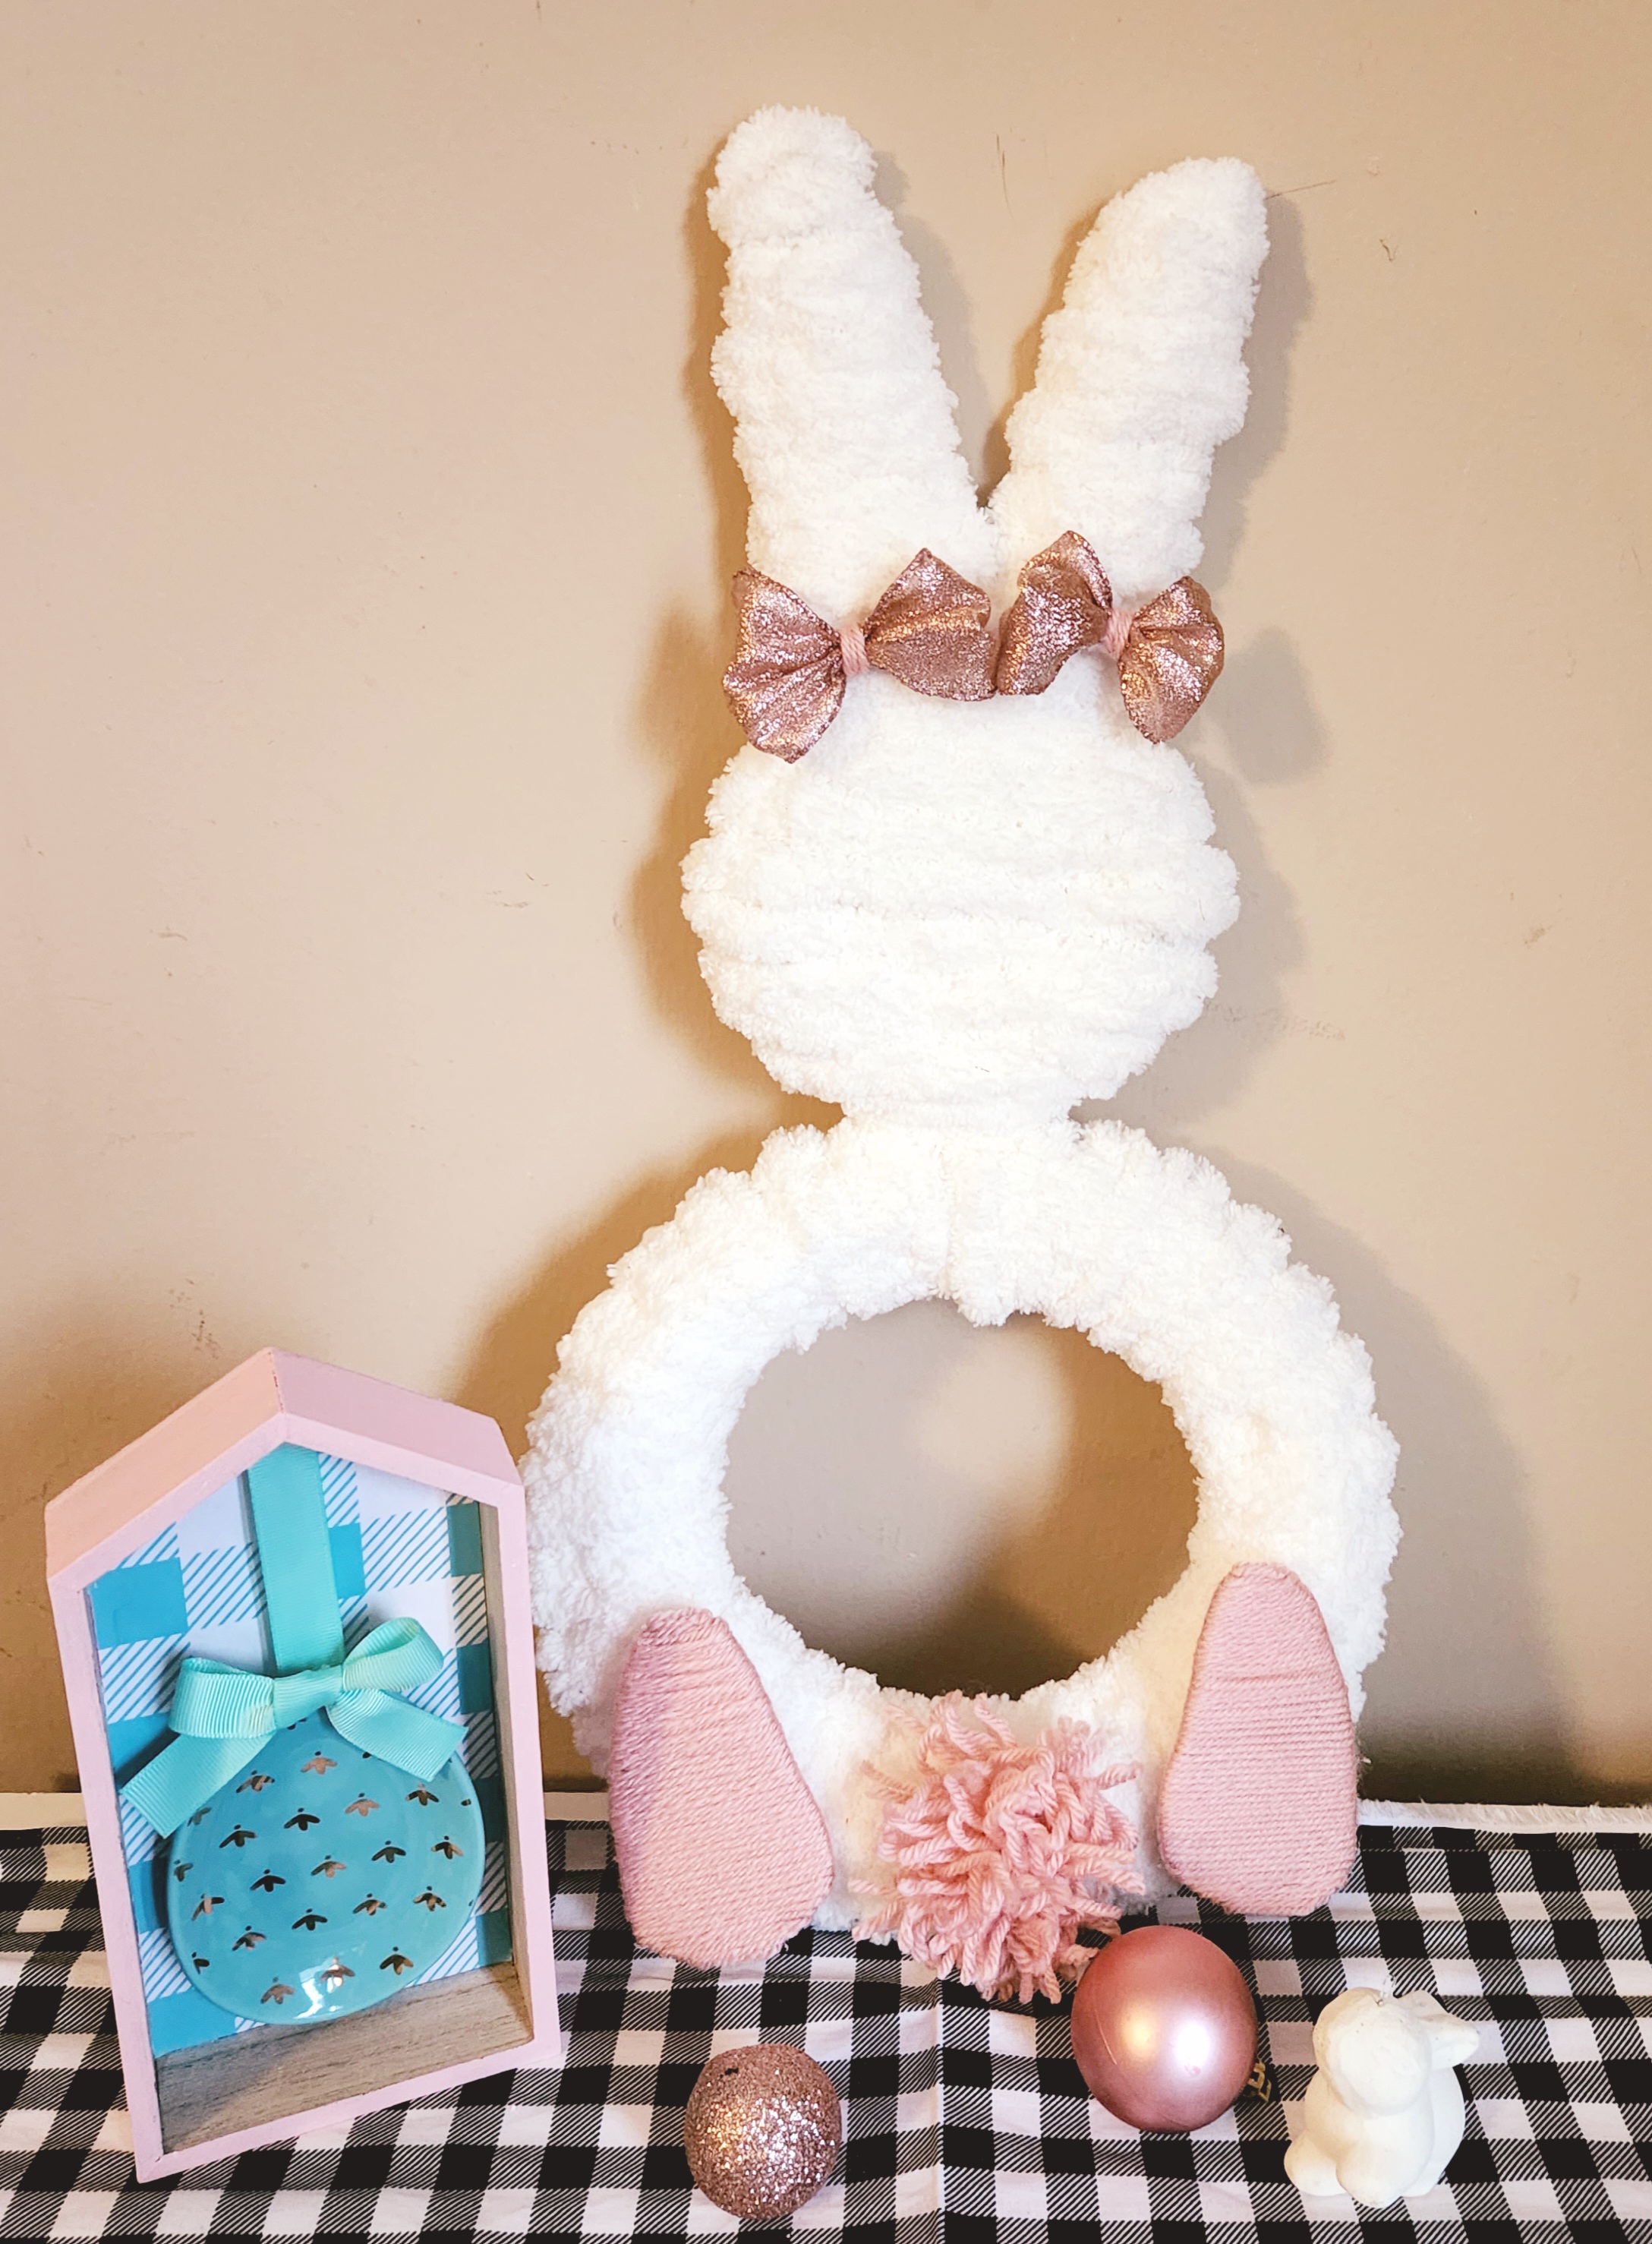 bunny wreath: Completed bunny wreath wrapped with chunky white yarn covering the head completely with the body wrapped like a regular wreath form having an open middle, there are two feet facing outward on the bottom, a pink pompom tail, and two metallic pink bows on the ears.